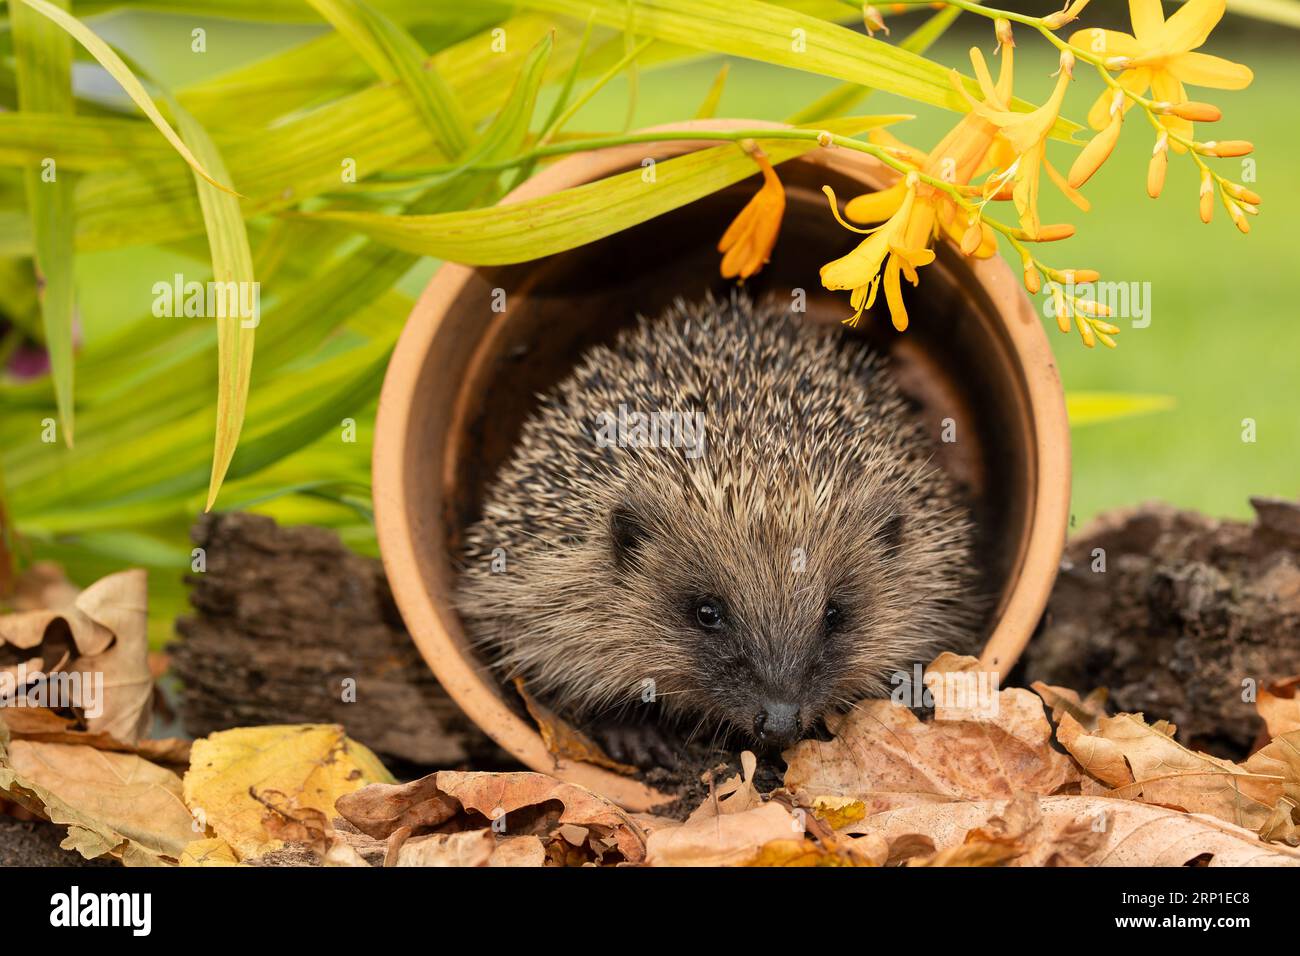 Hedgehog, Scientific name, Erinaceus Europaeus.  Close up of a wild, native European hedgehog in late Summer, facing front inside a terracotta flower Stock Photo